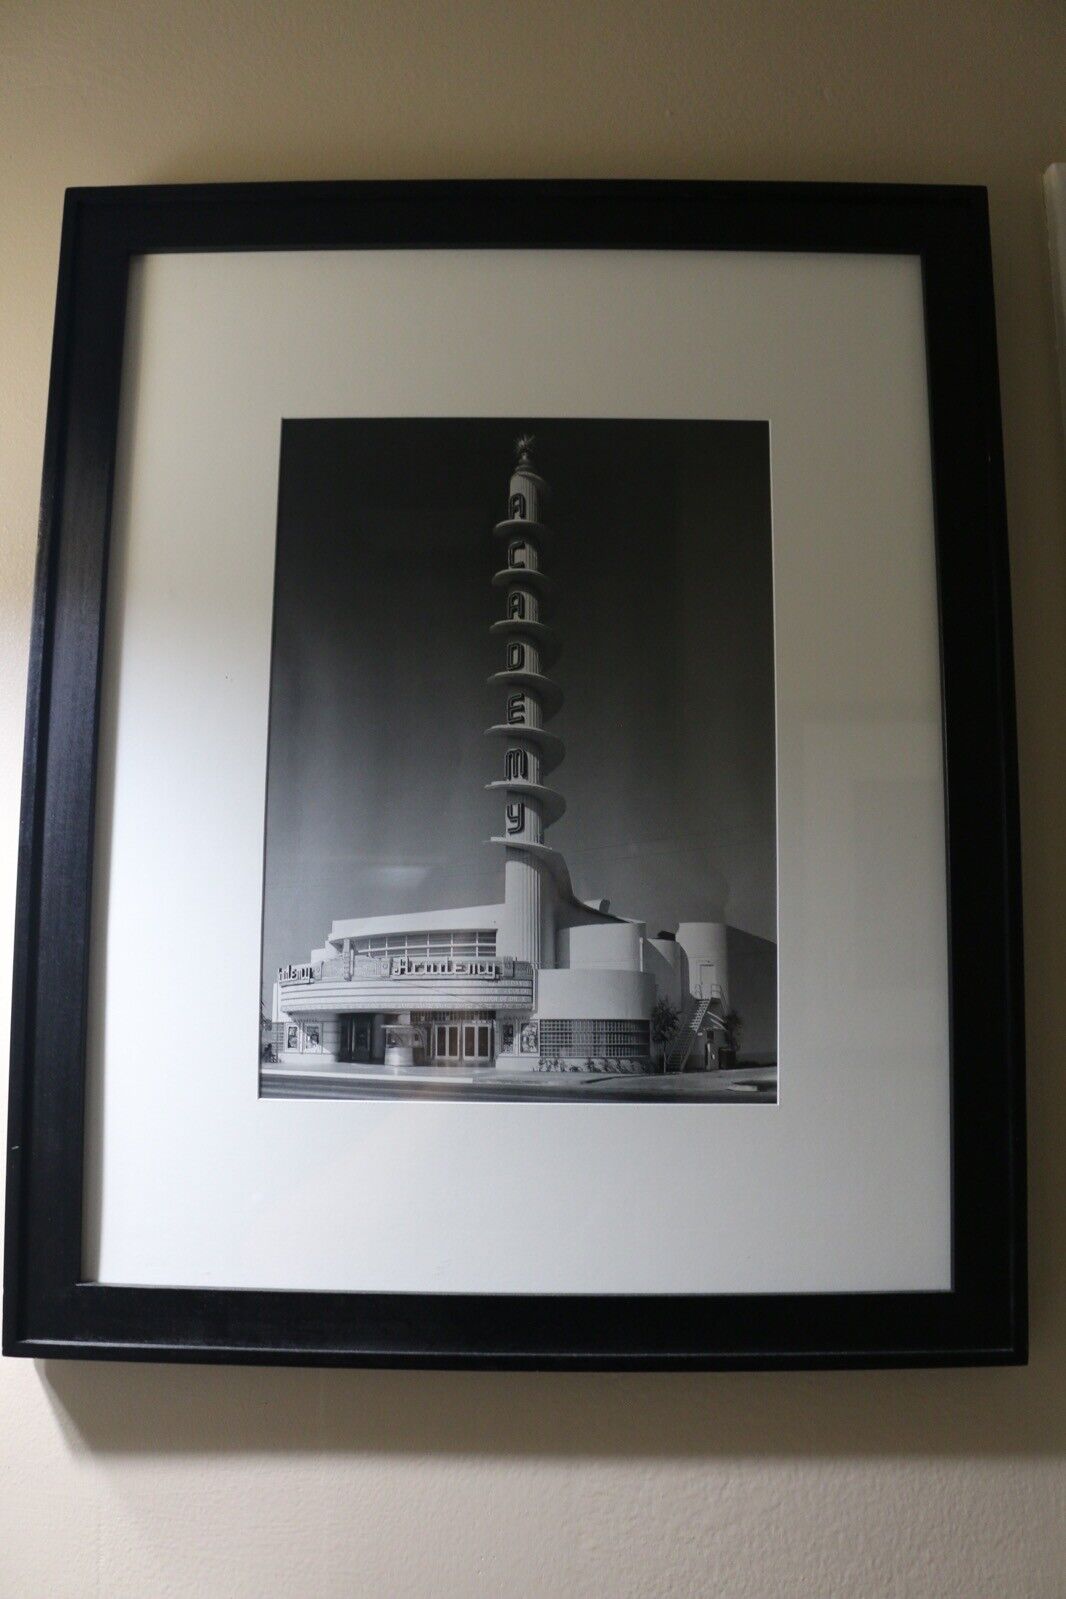 PHOTO FRAMED - Academy Theatre Los Angeles California Photograph About 16x20